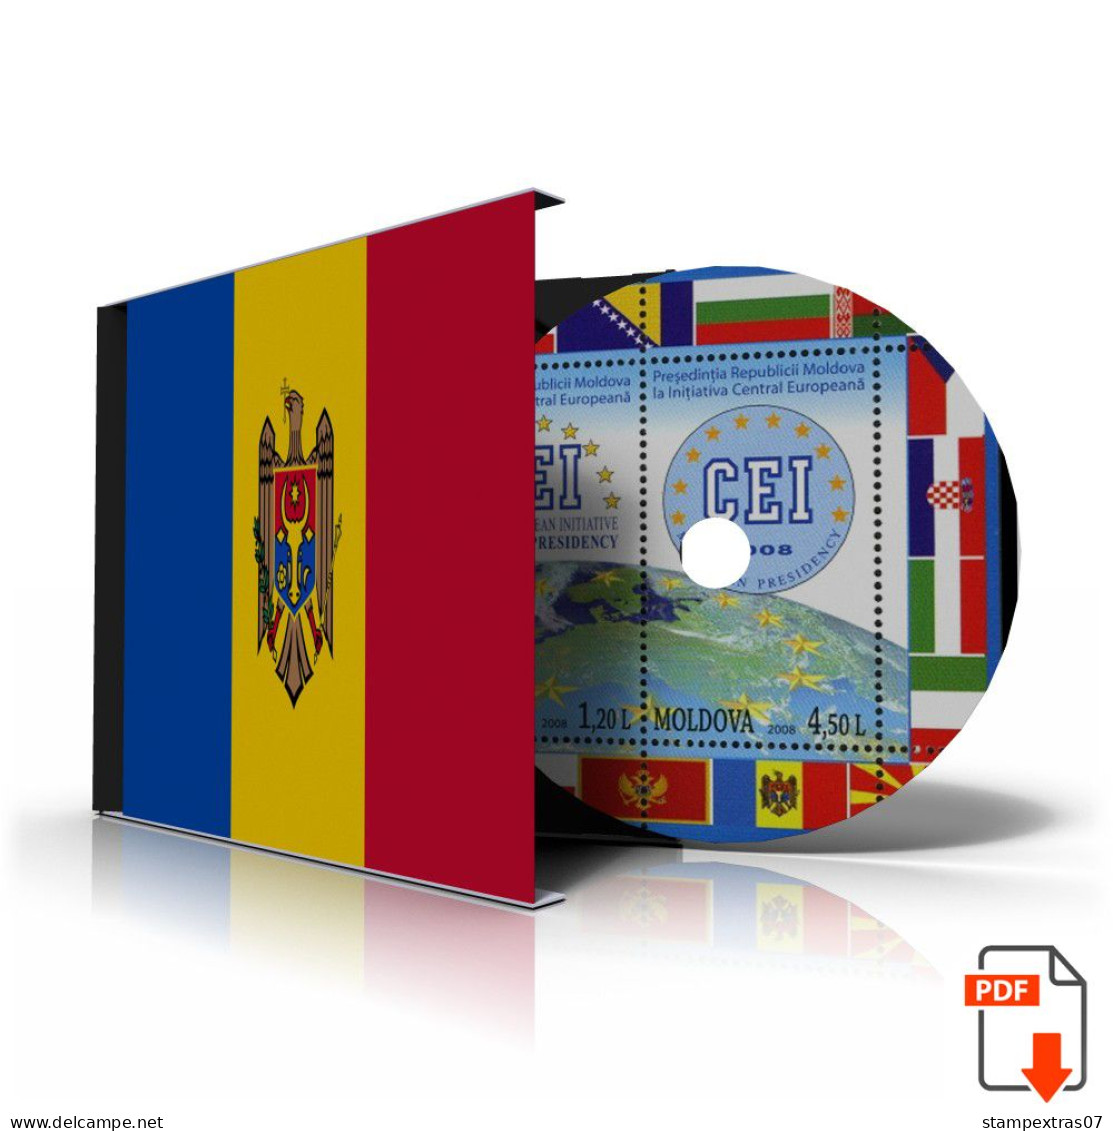 MOLDOVA STAMP ALBUM PAGES 1991-2011 (100 Color Illustrated Pages) - English